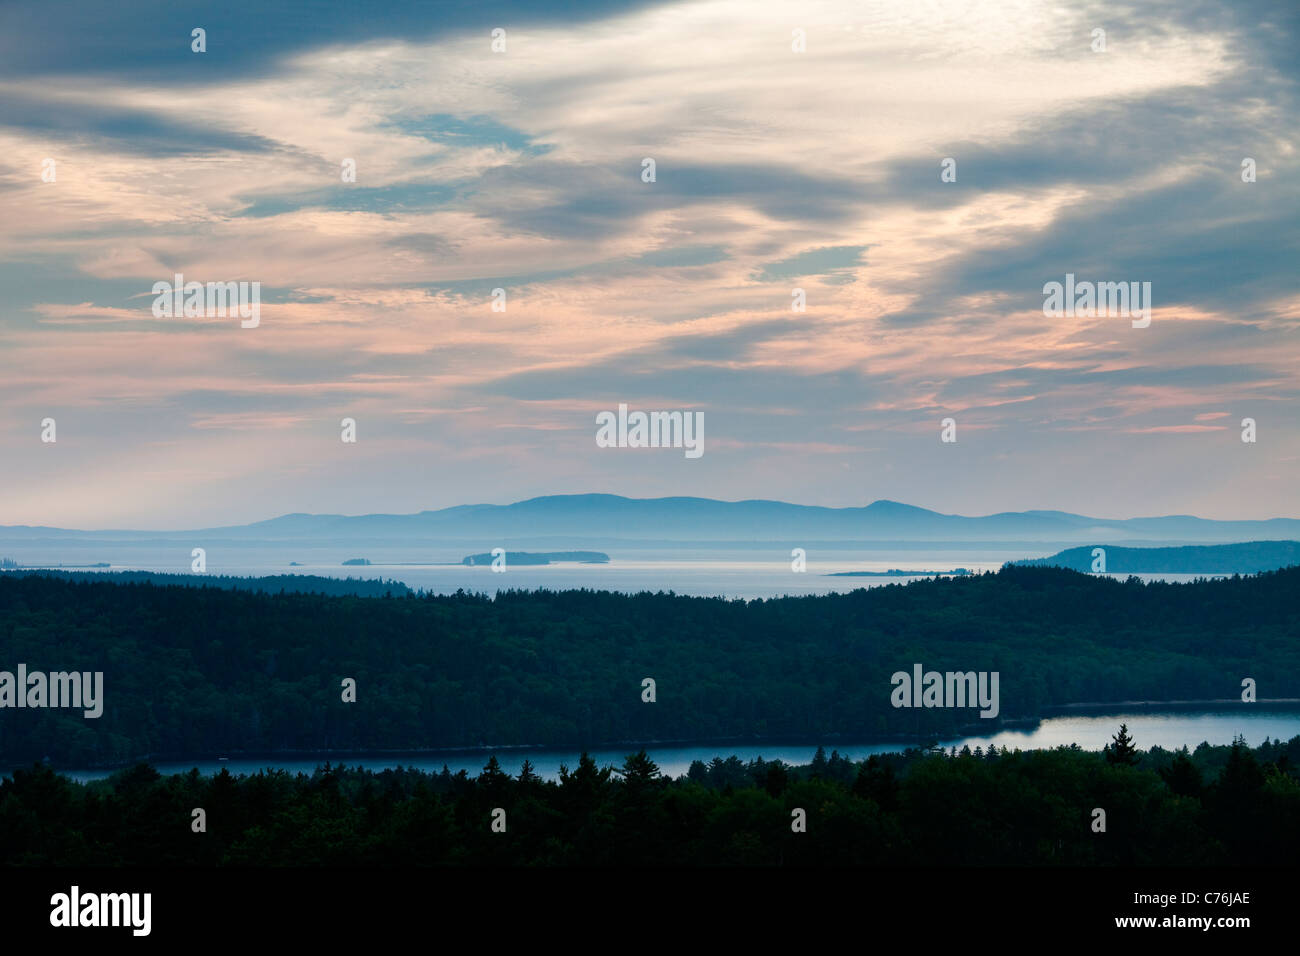 A landscape image of the mountains and coast at dusk. Stock Photo